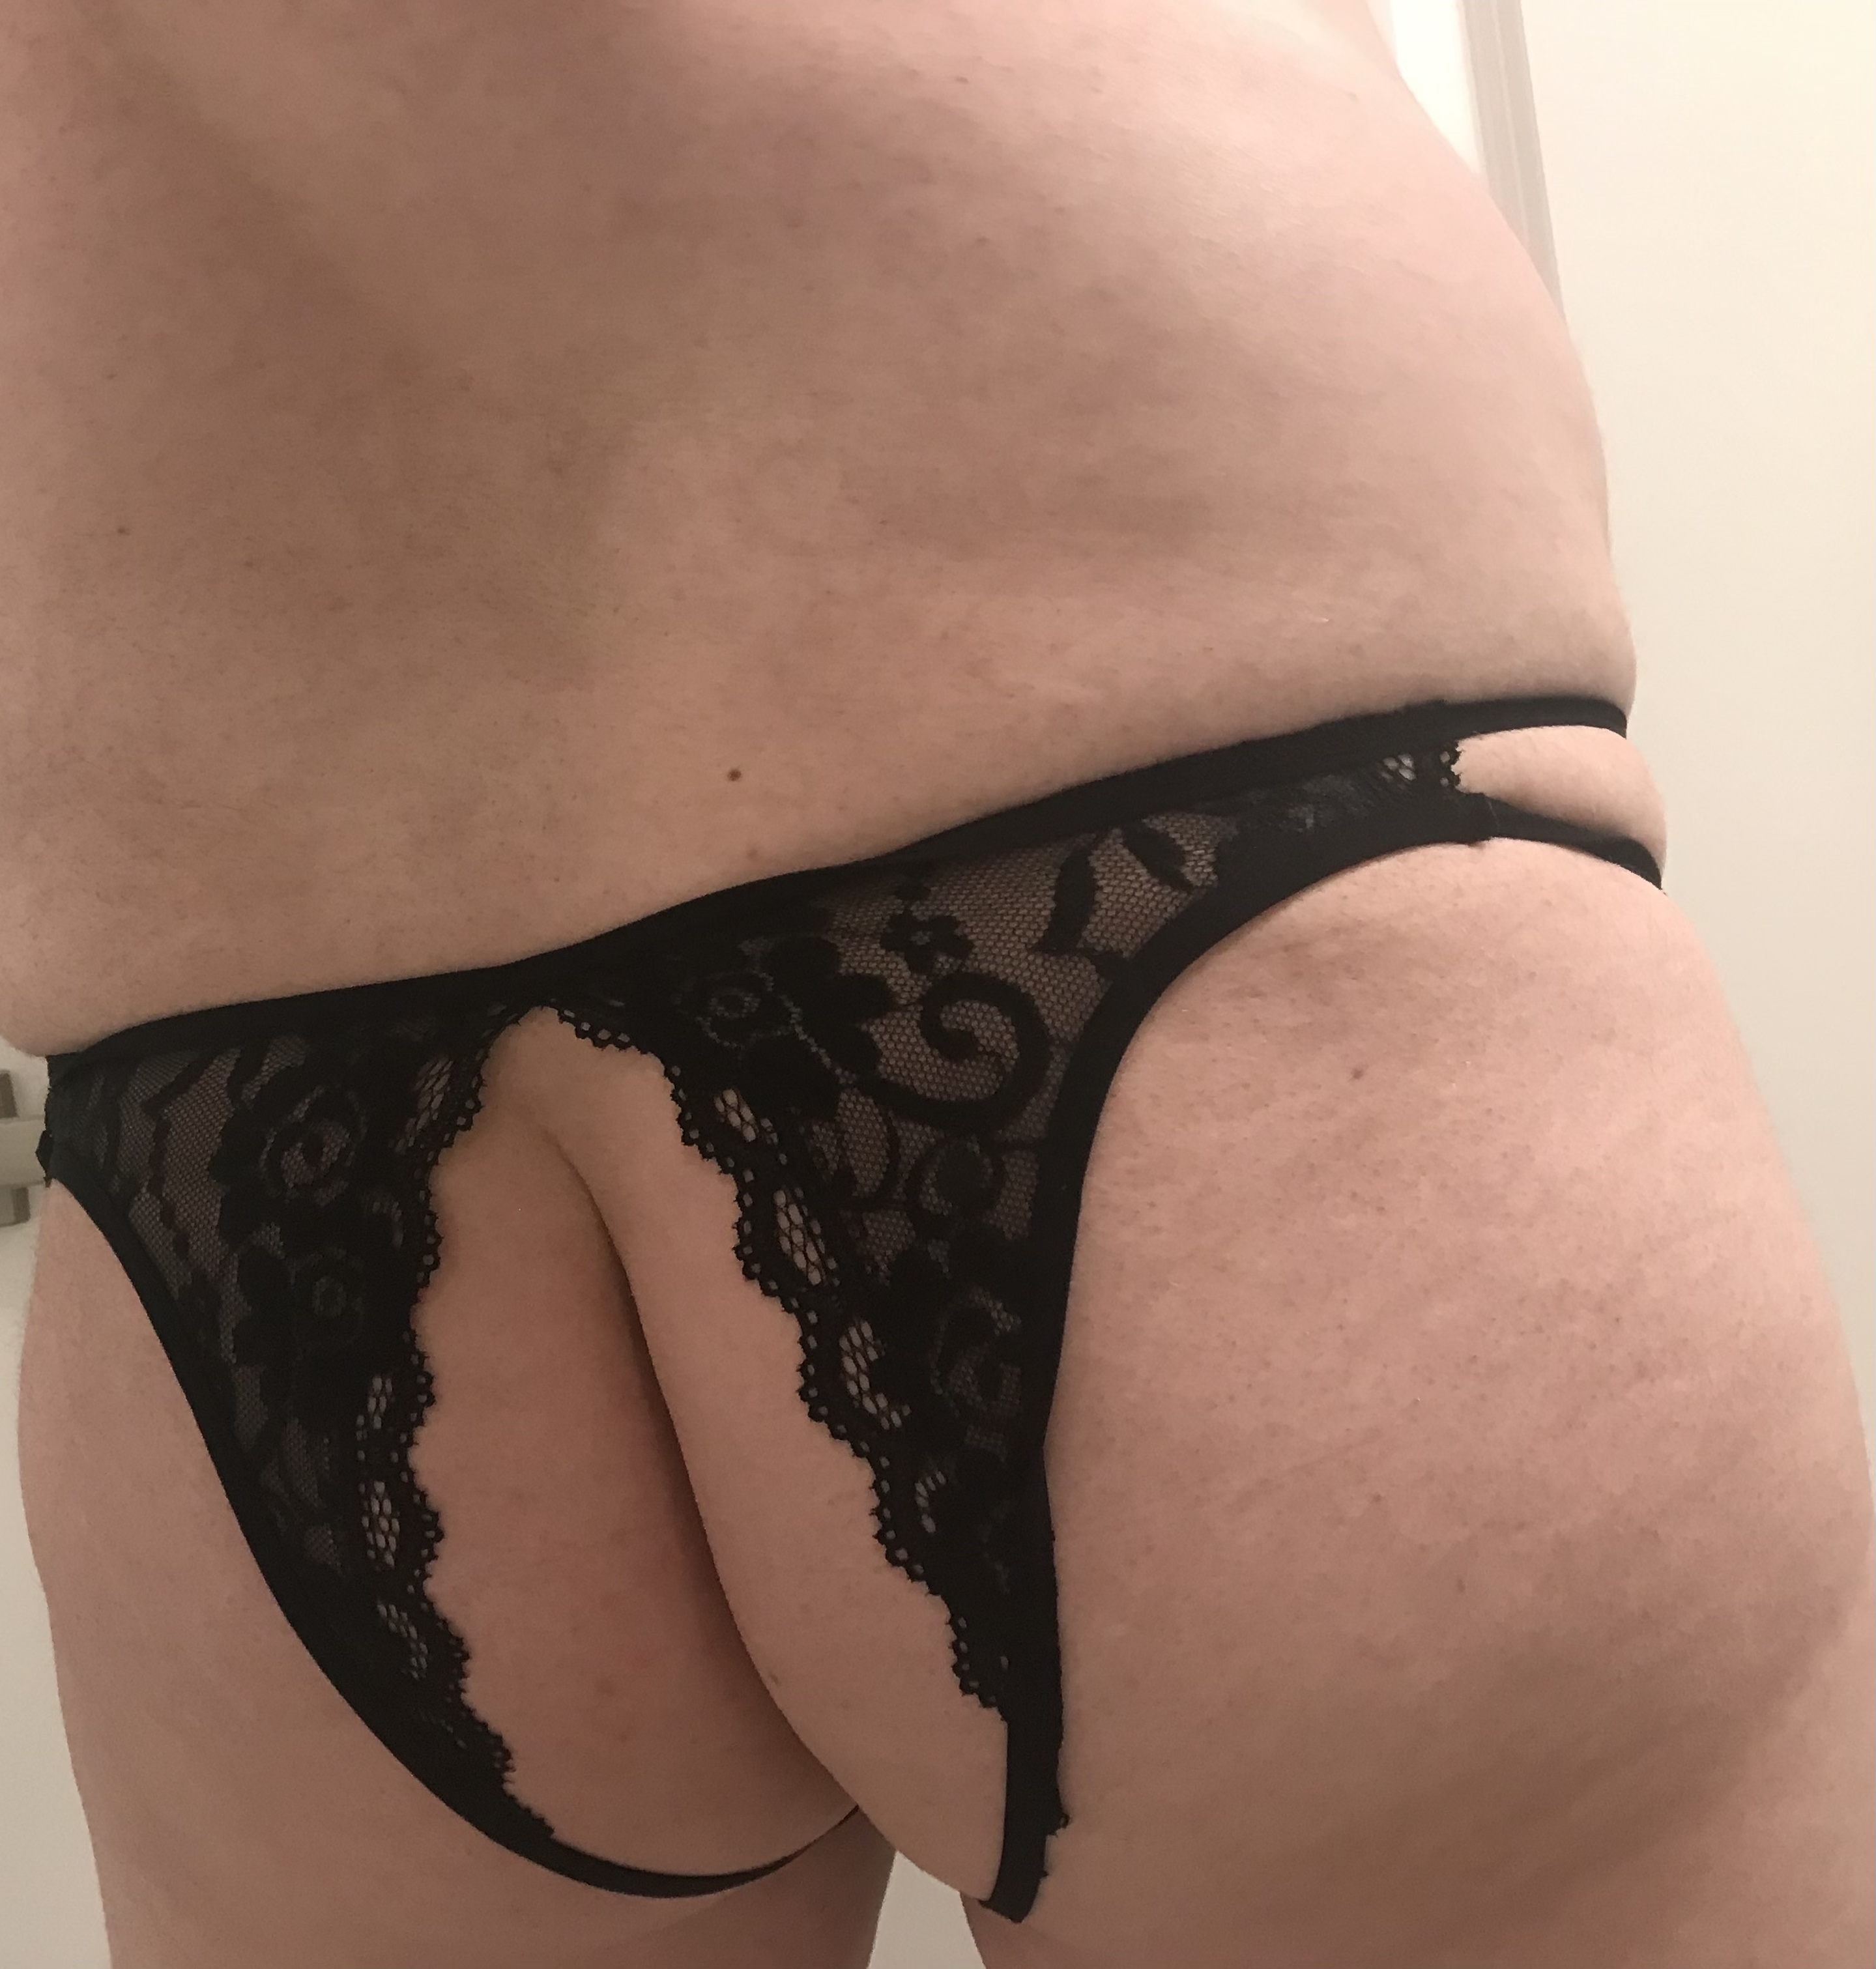 Crotchless panties are perfect for a bi cuckold like you, cucky! hq pic